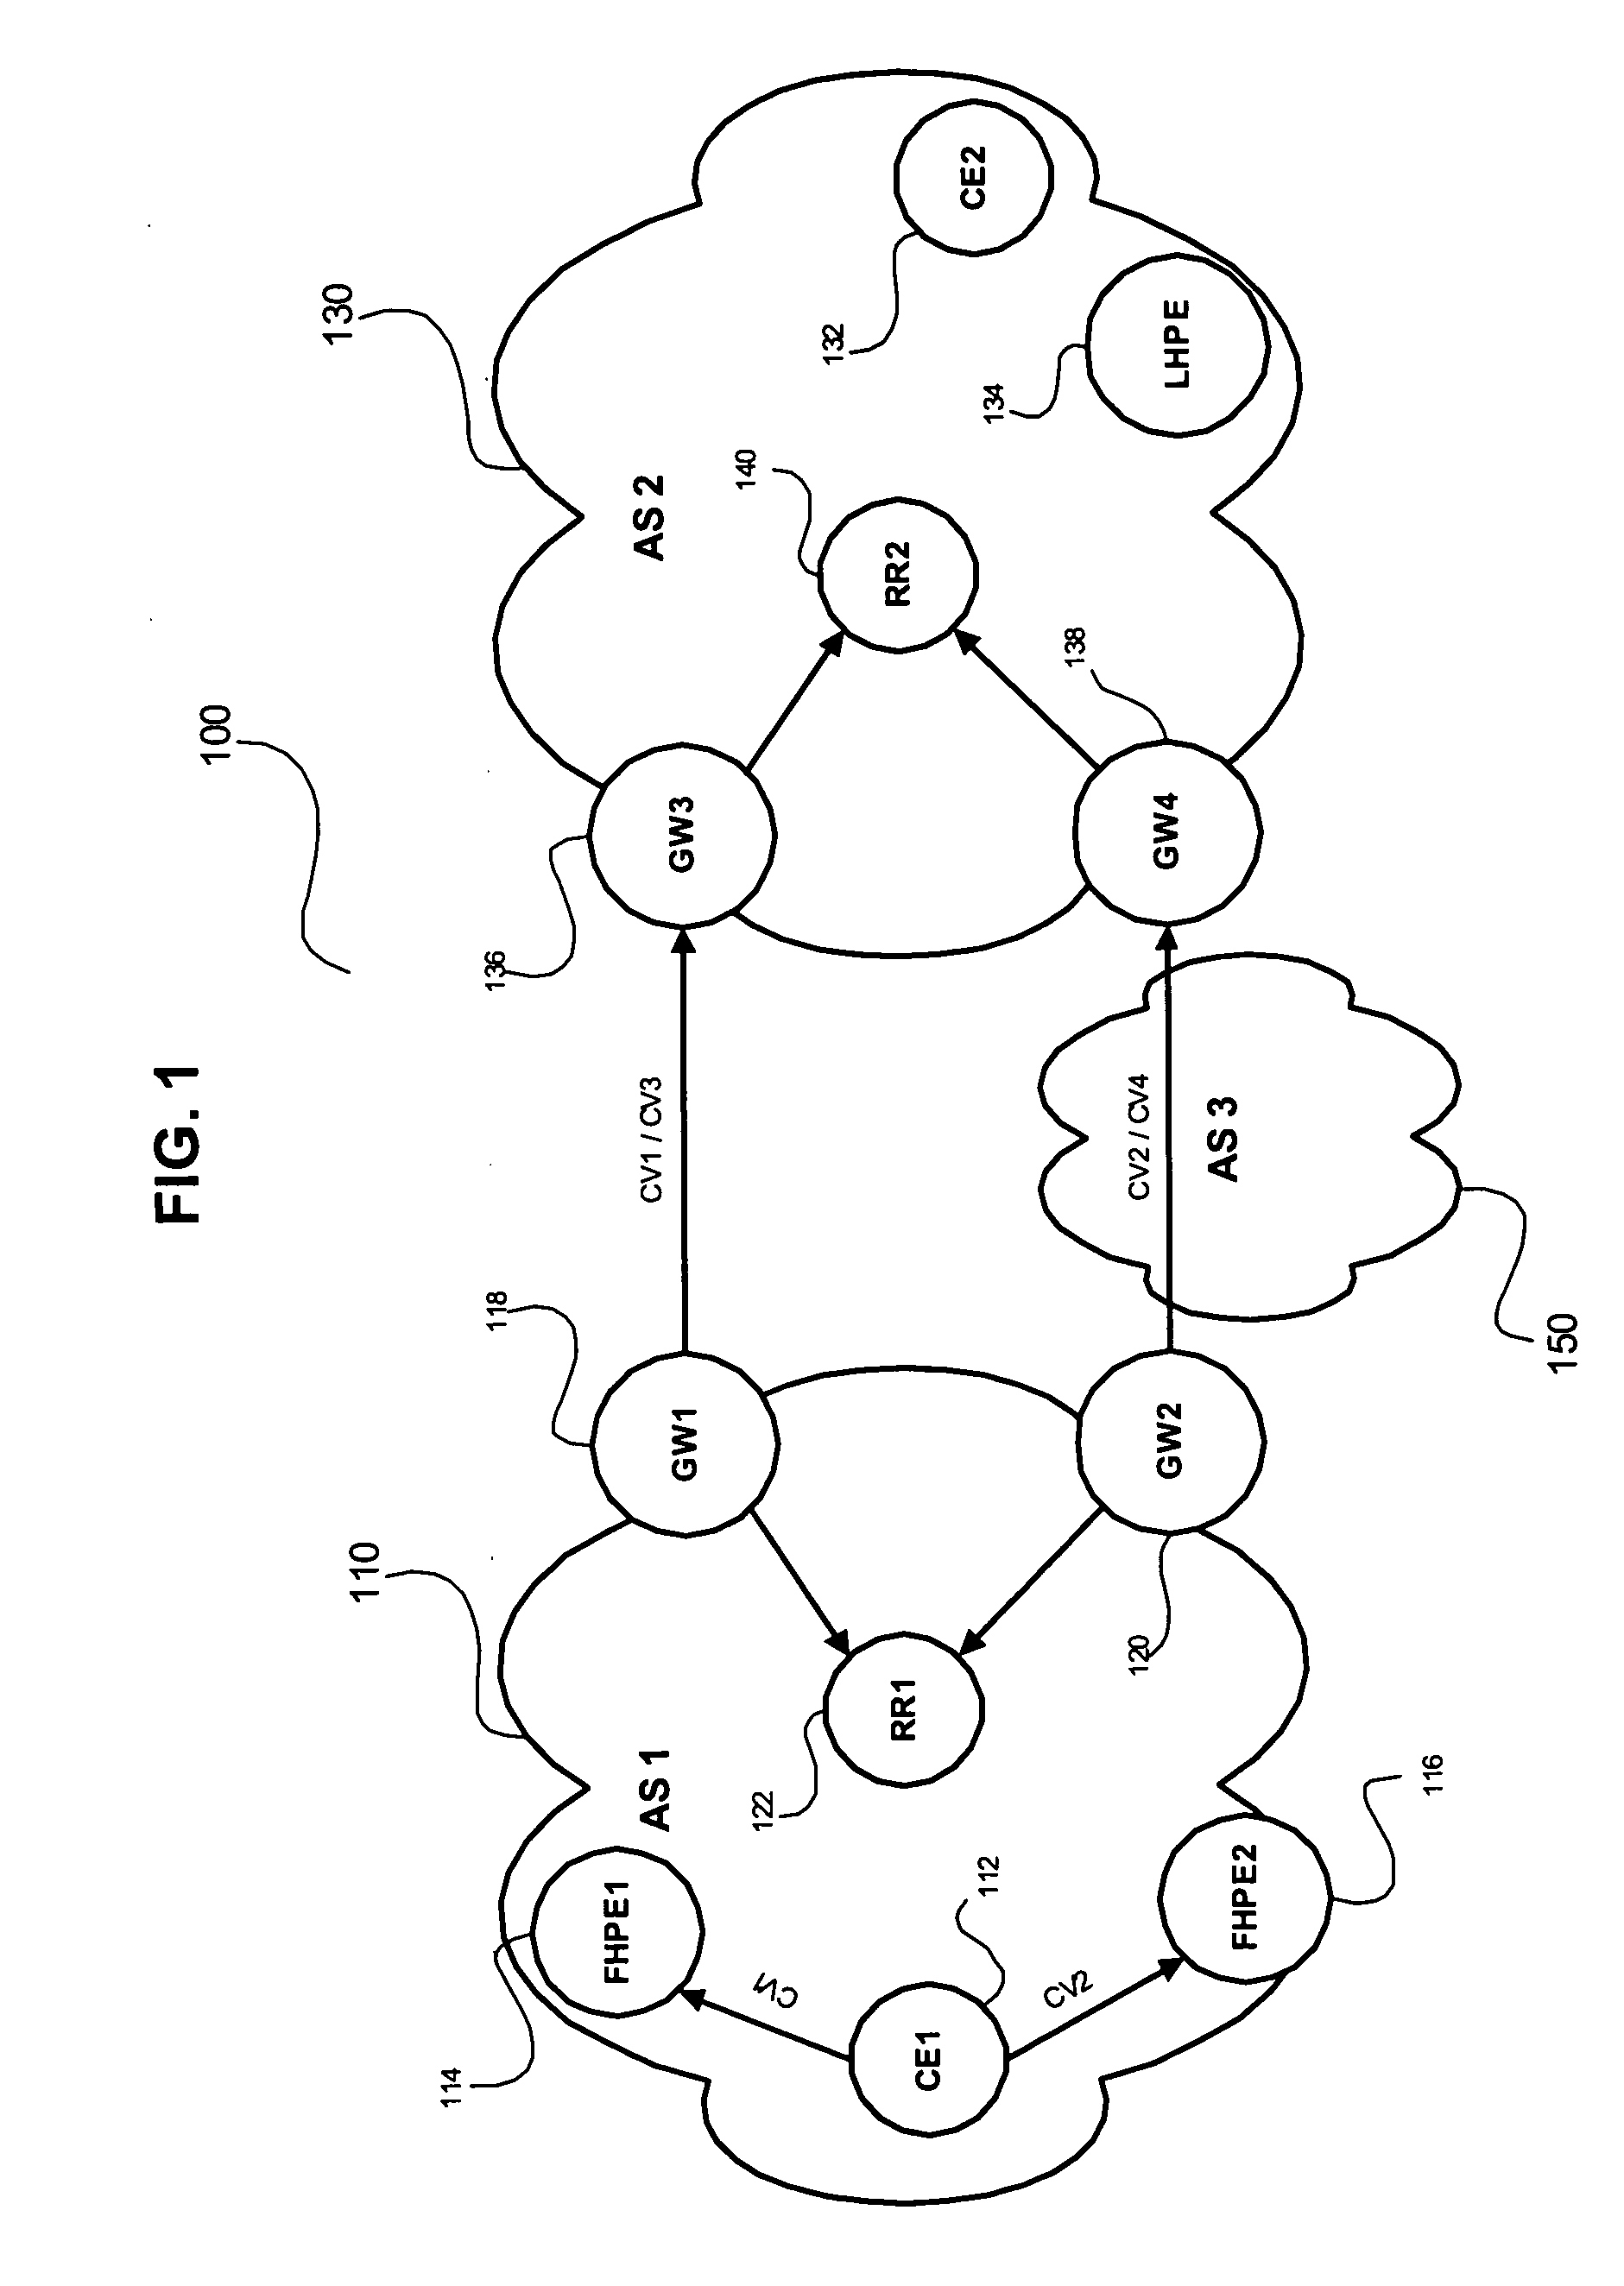 Method and system for gateway selection in inter-region communication on IP networks